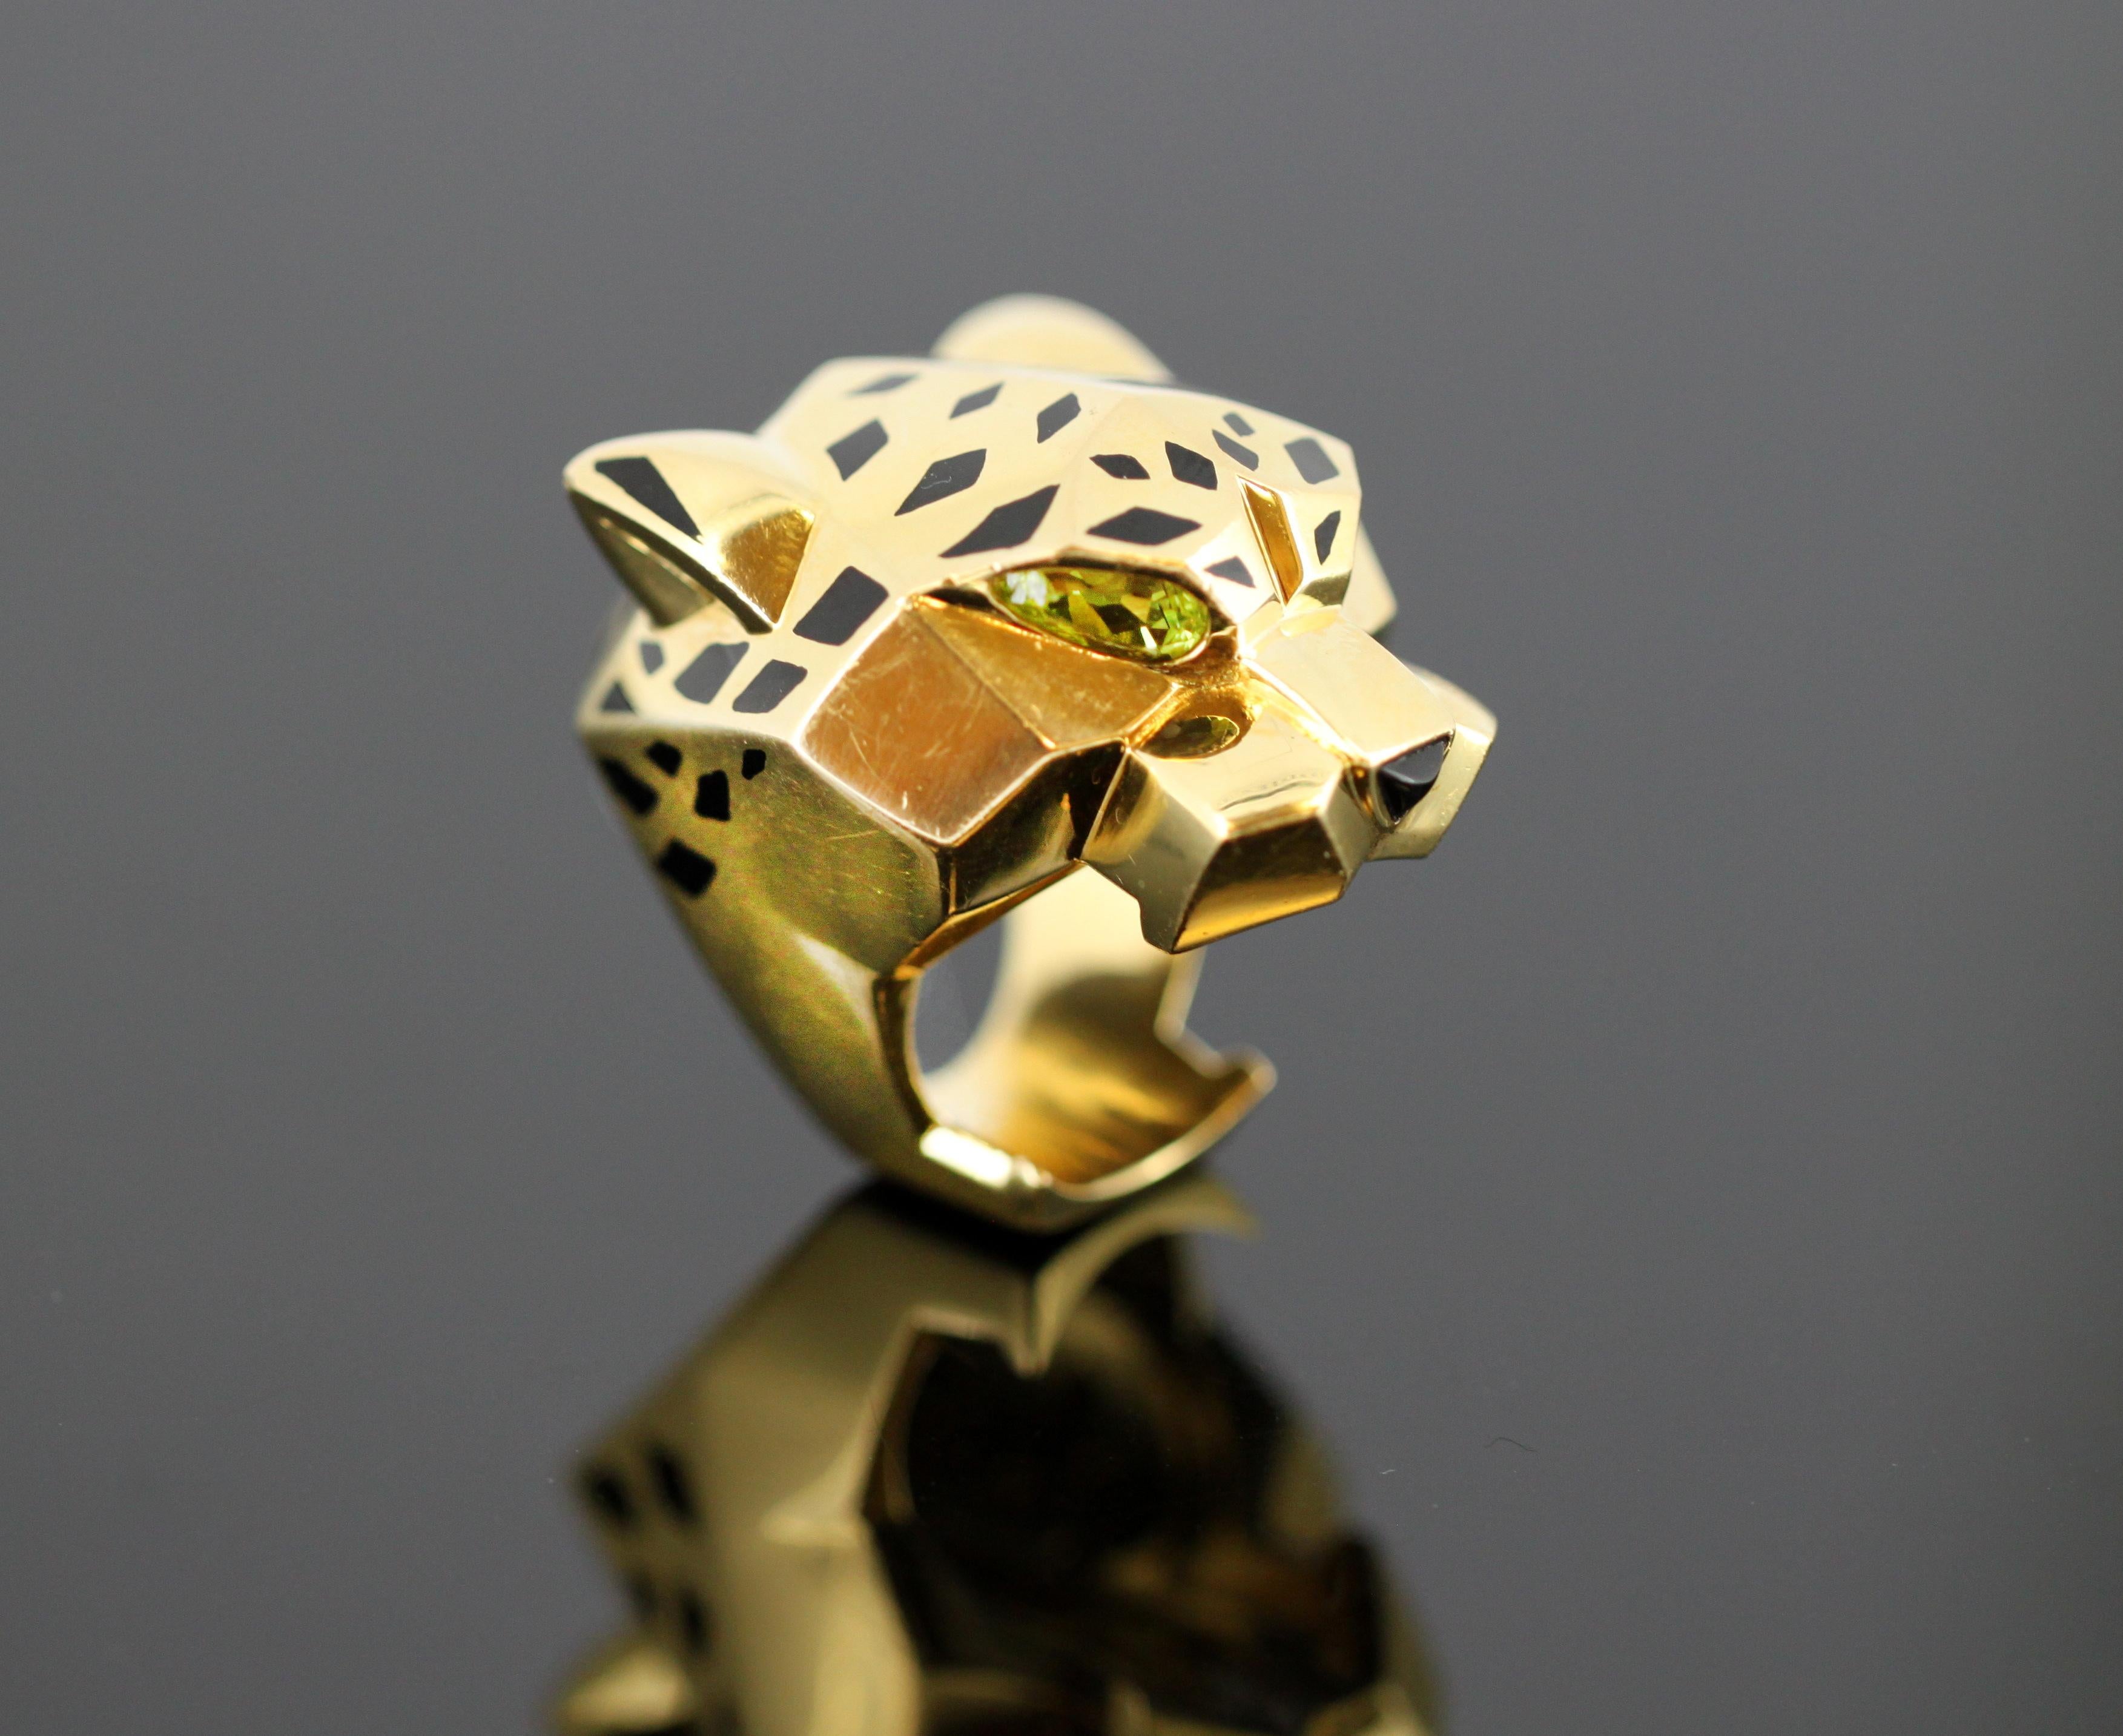 PANTHÈRE DE CARTIER RING - YELLOW GOLD, LACQUER, PERIDOTS, ONYX.
Designer: Cartier
Serial: 15347B
Made in France Circa 1990's
Fully hallmarked.

The Cartier panther first leapt into the Maison's aesthetic in 1914. Whilst Louis Cartier was the first